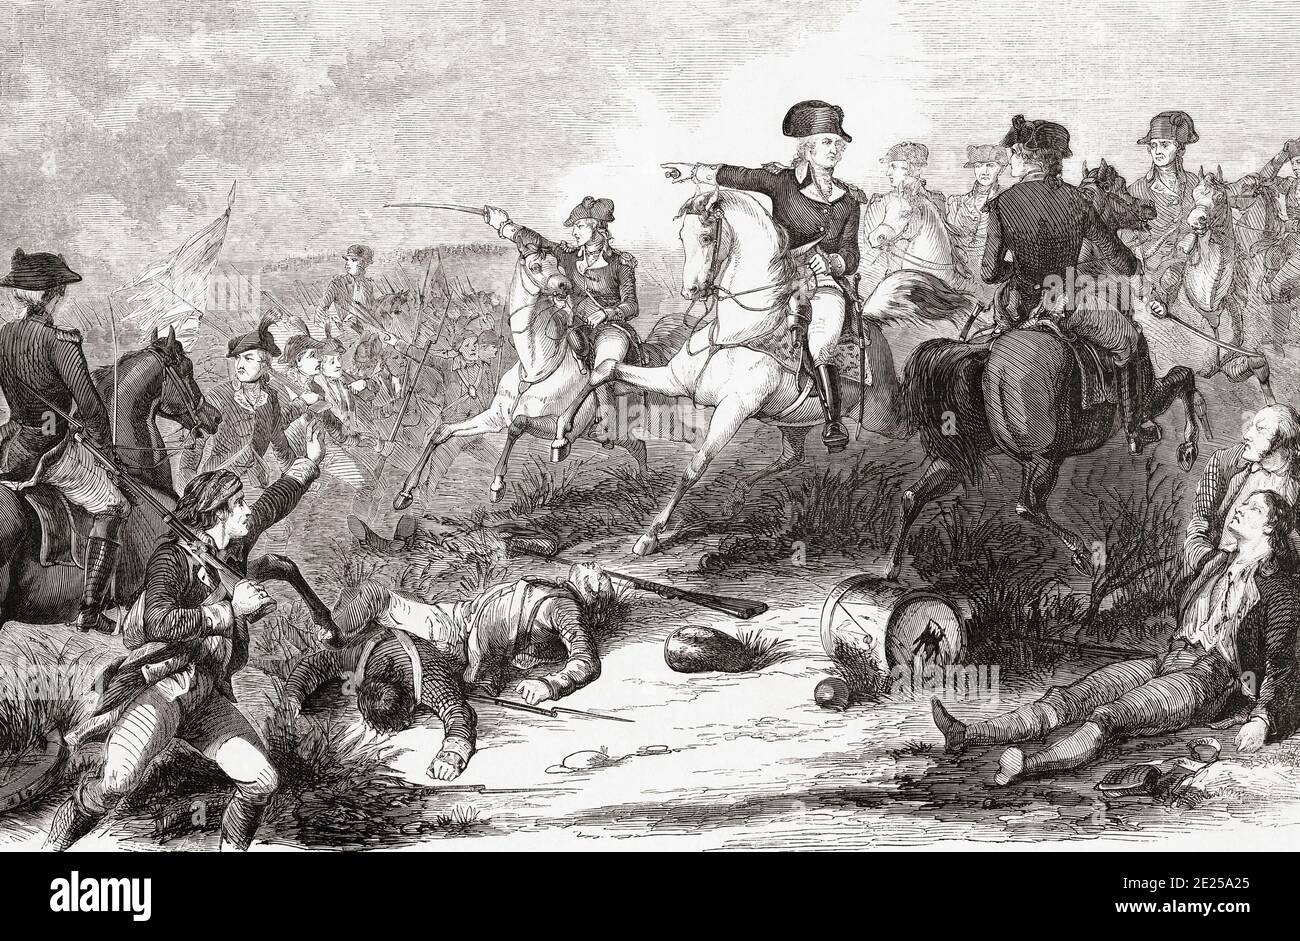 The Battle of Monmouth or Battle of Monmouth Court House, June 28, 1778 during the American Revolutionary War.  In the picture George Washington rallies his troops of the Continental Army.  After a 19th century engraving by an unidentified artist. Stock Photo